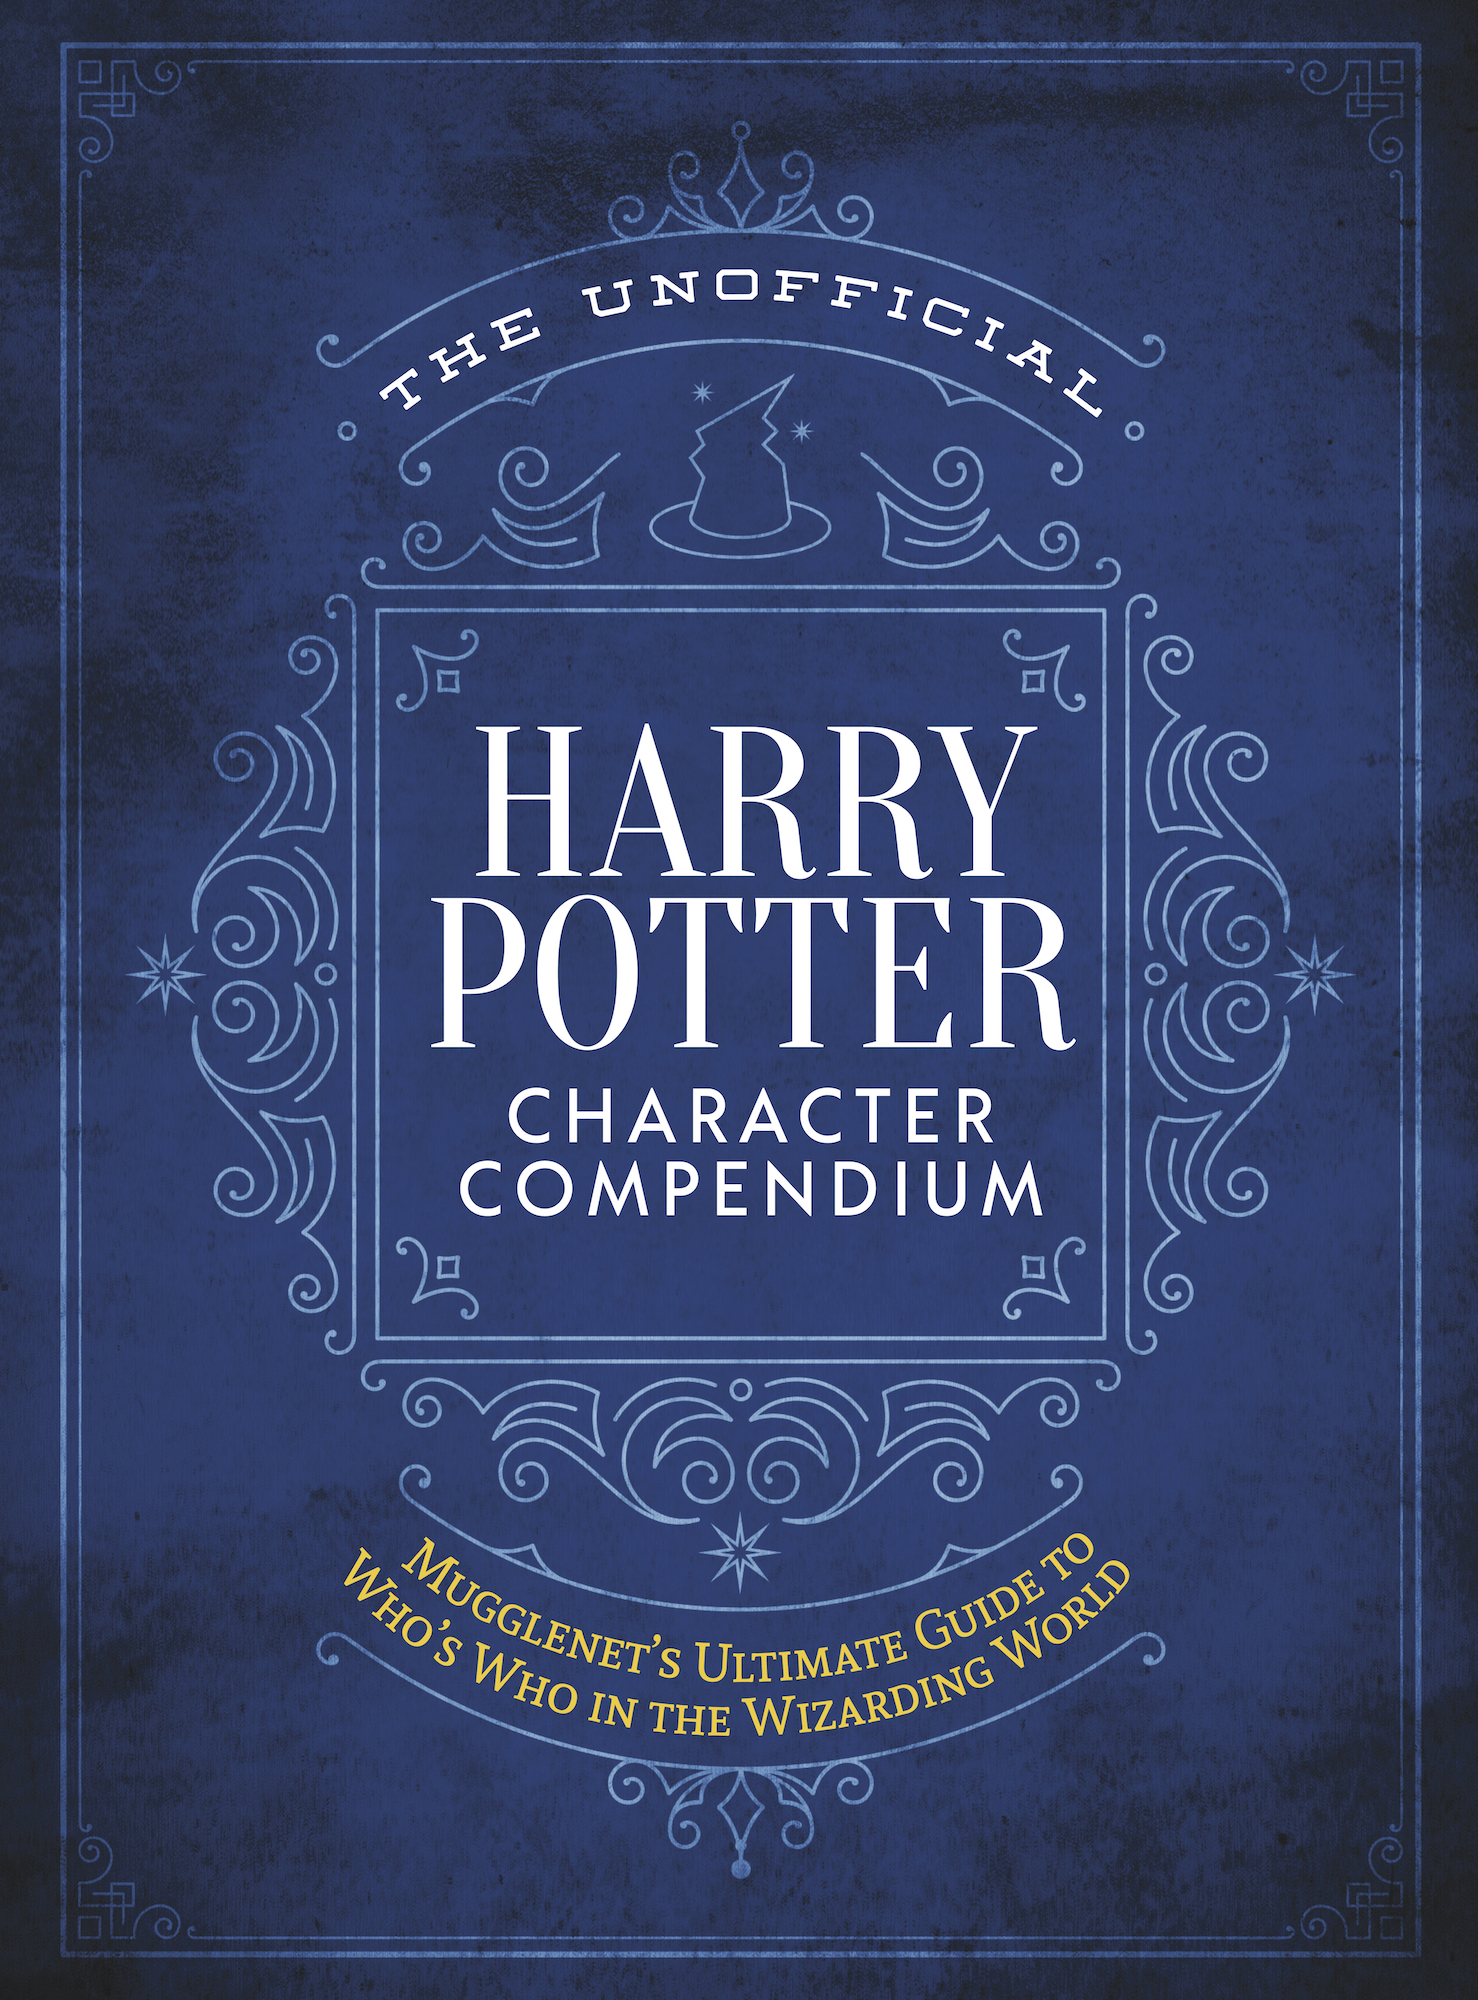 “The Unofficial Harry Potter Character Compendium”